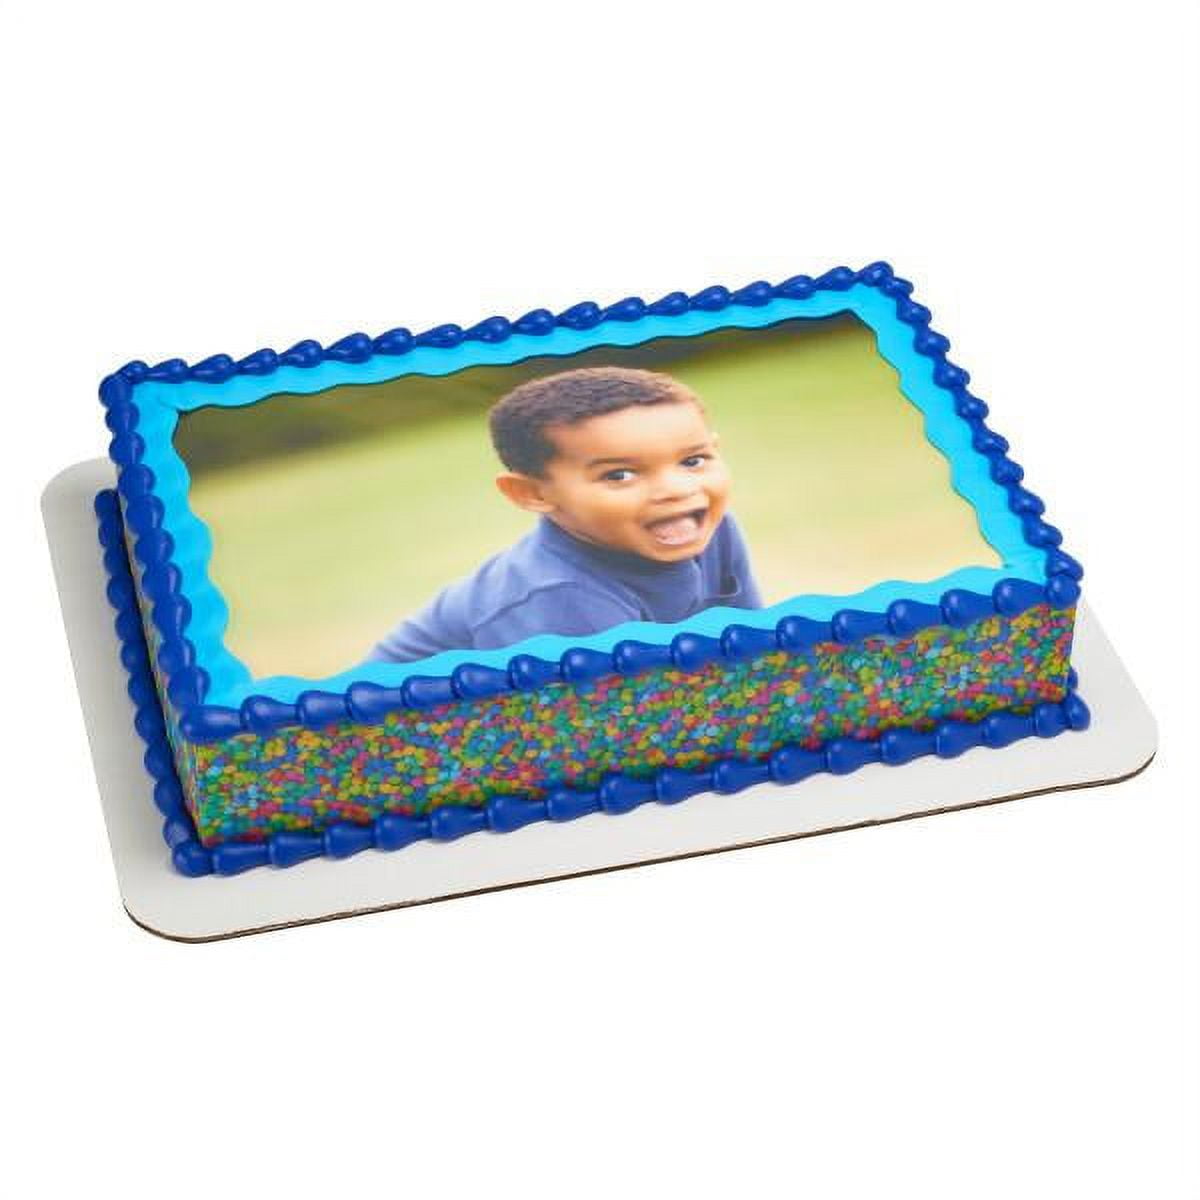 Fortnite Battle Royale Happy Birthday Personalize Edible Cake Topper Image  abpid51014